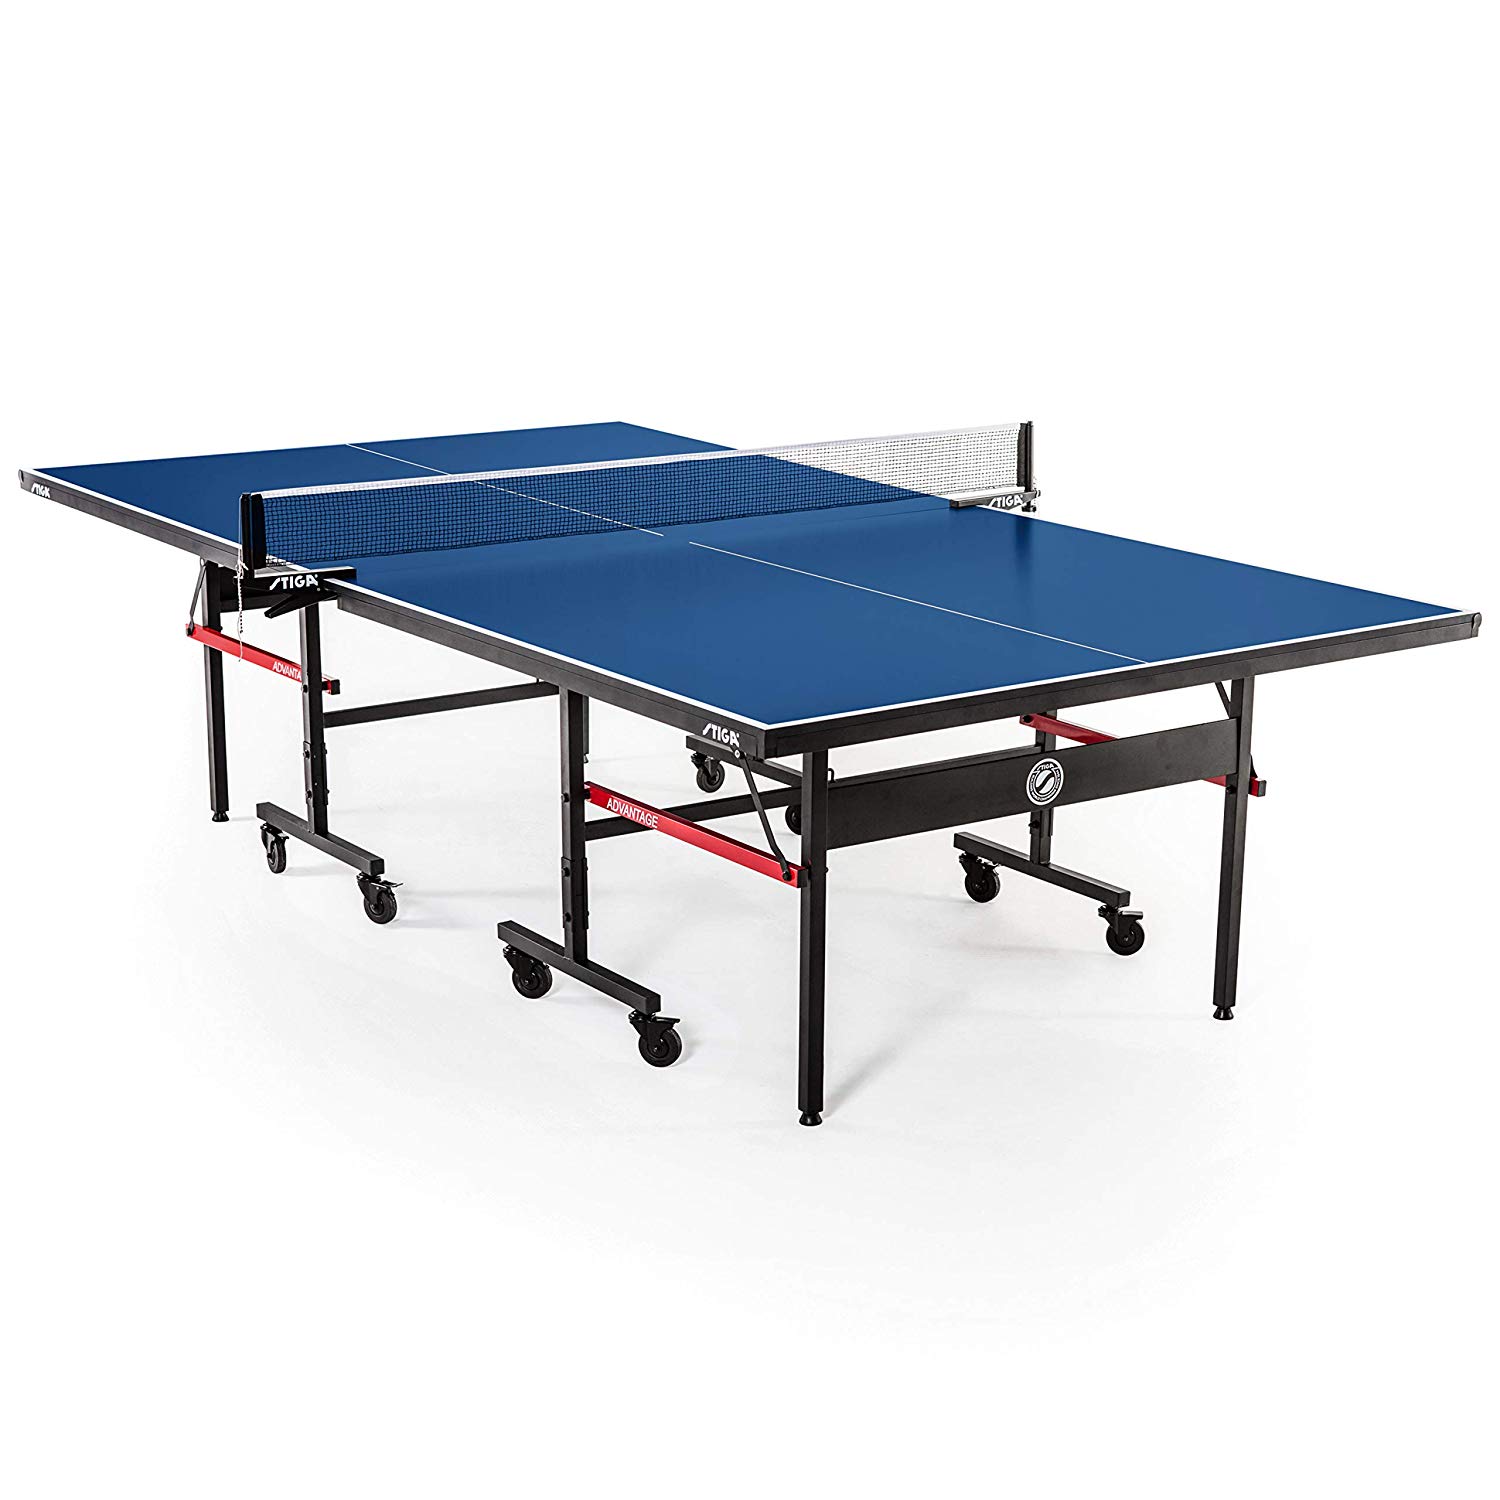 STIGA Advantage Competition-Ready Indoor Table Tennis Table